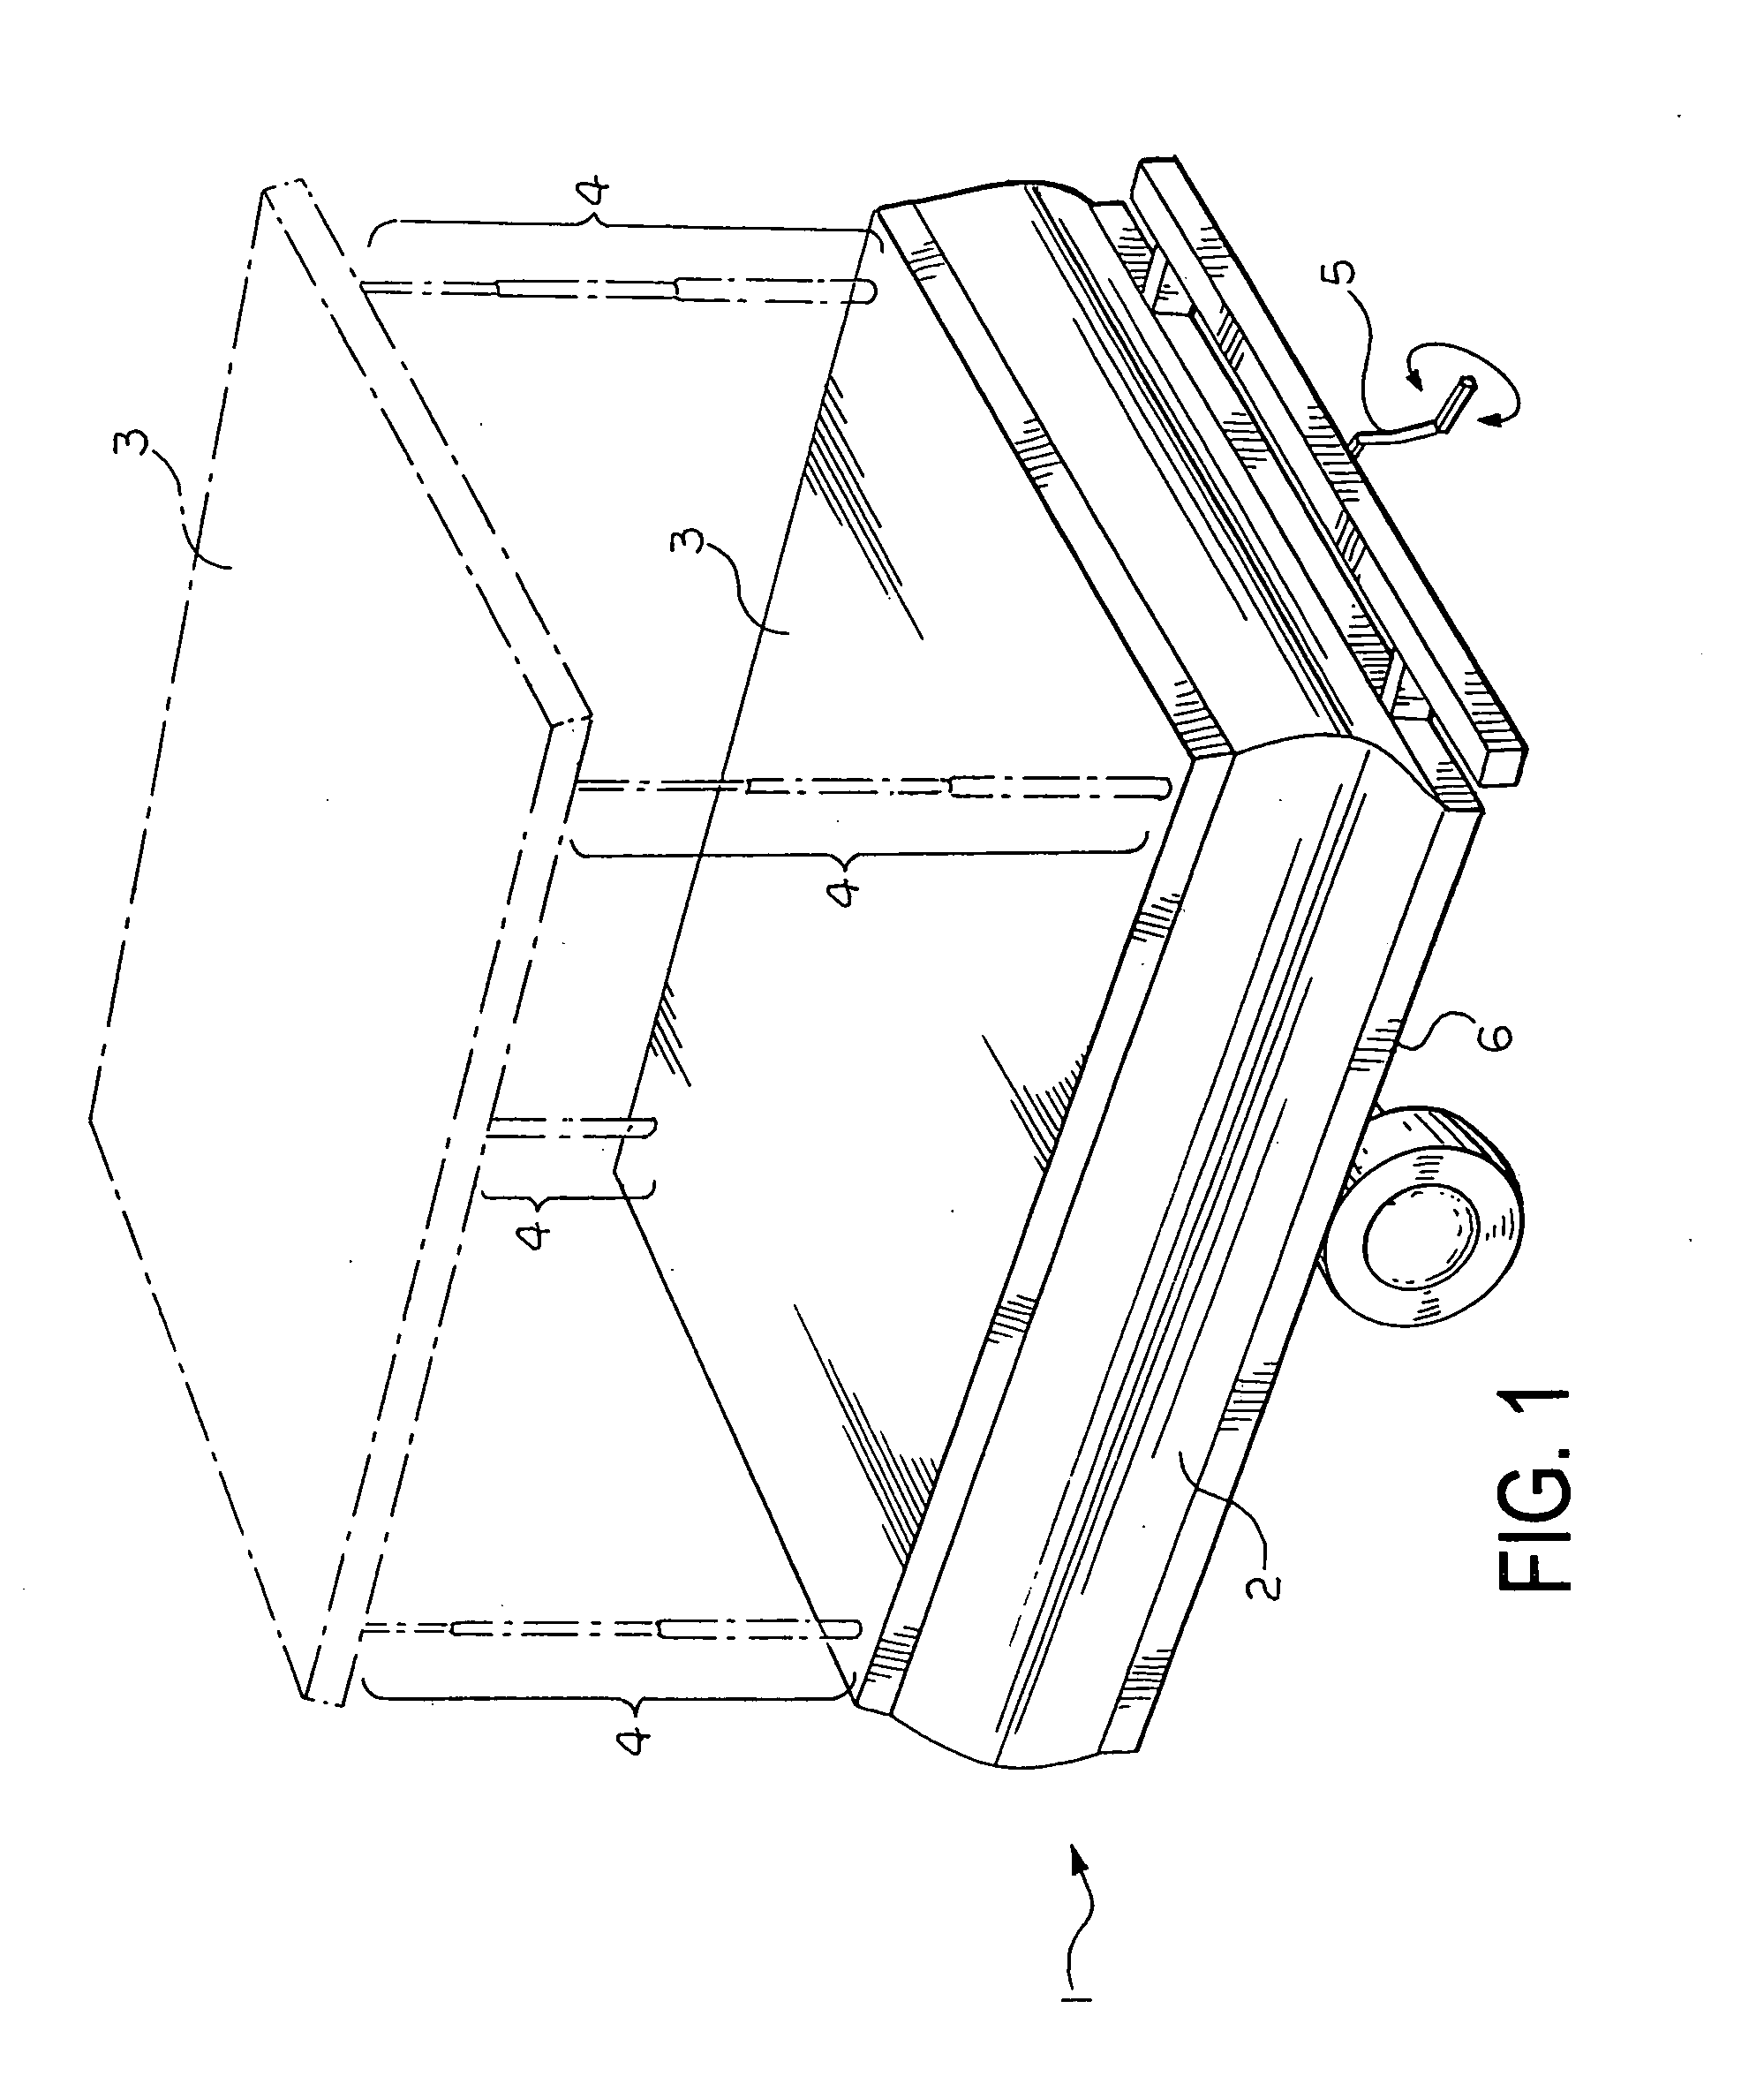 Extendable and retractable support system